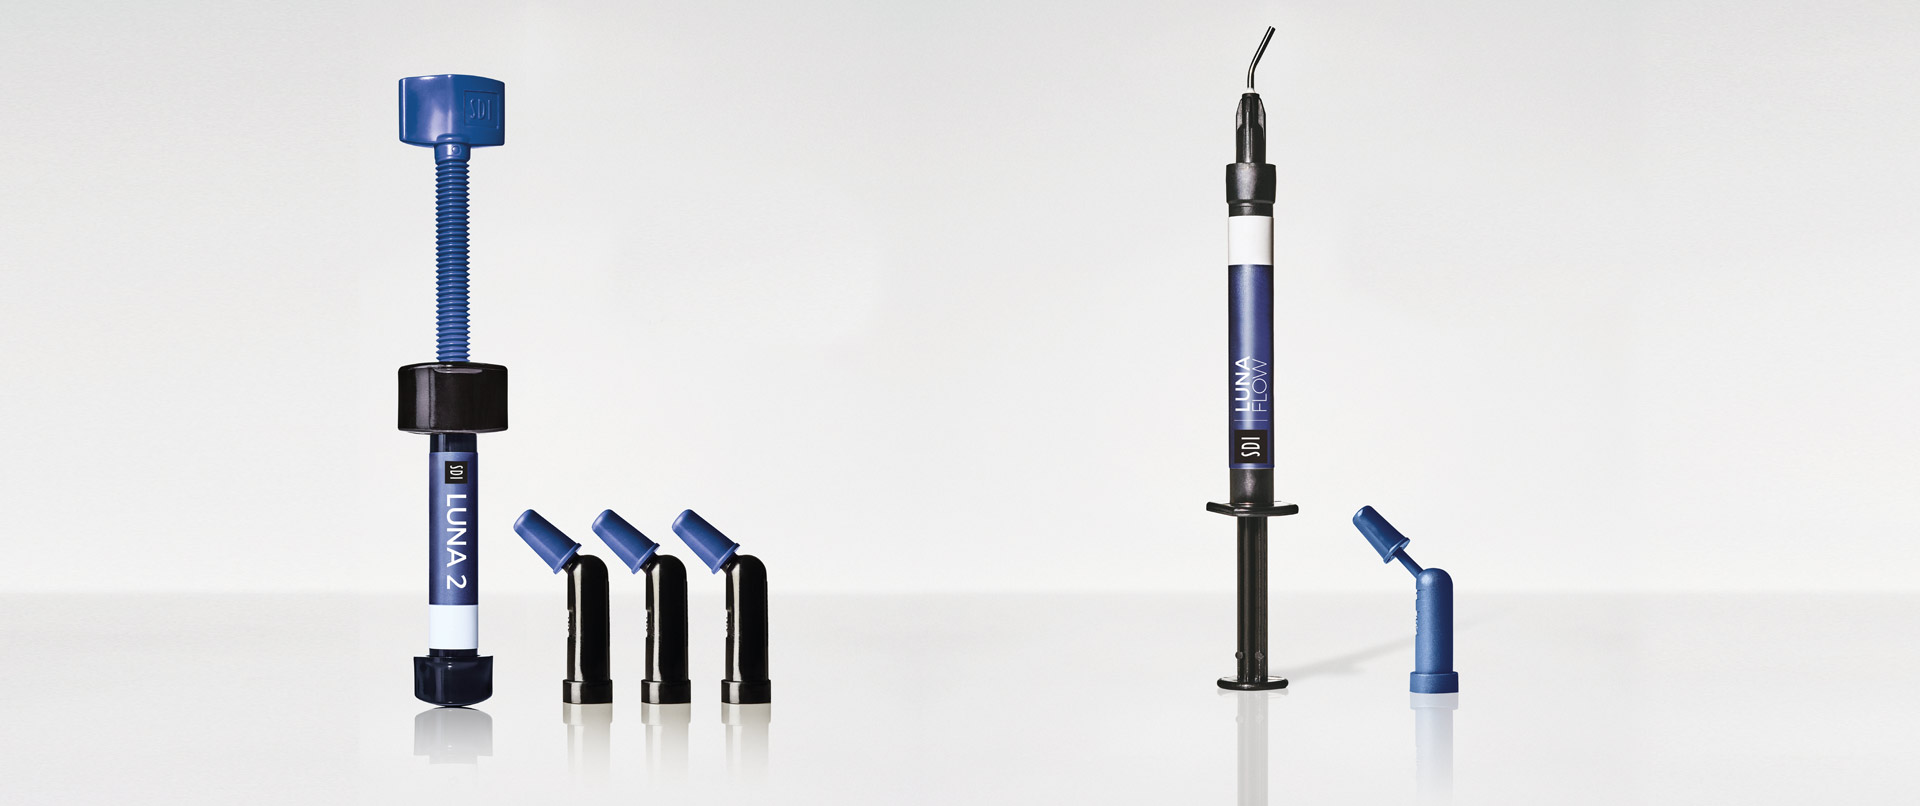 Not just another composite – SDI Luna 2 and Luna Flow overcome the challenges of composite use